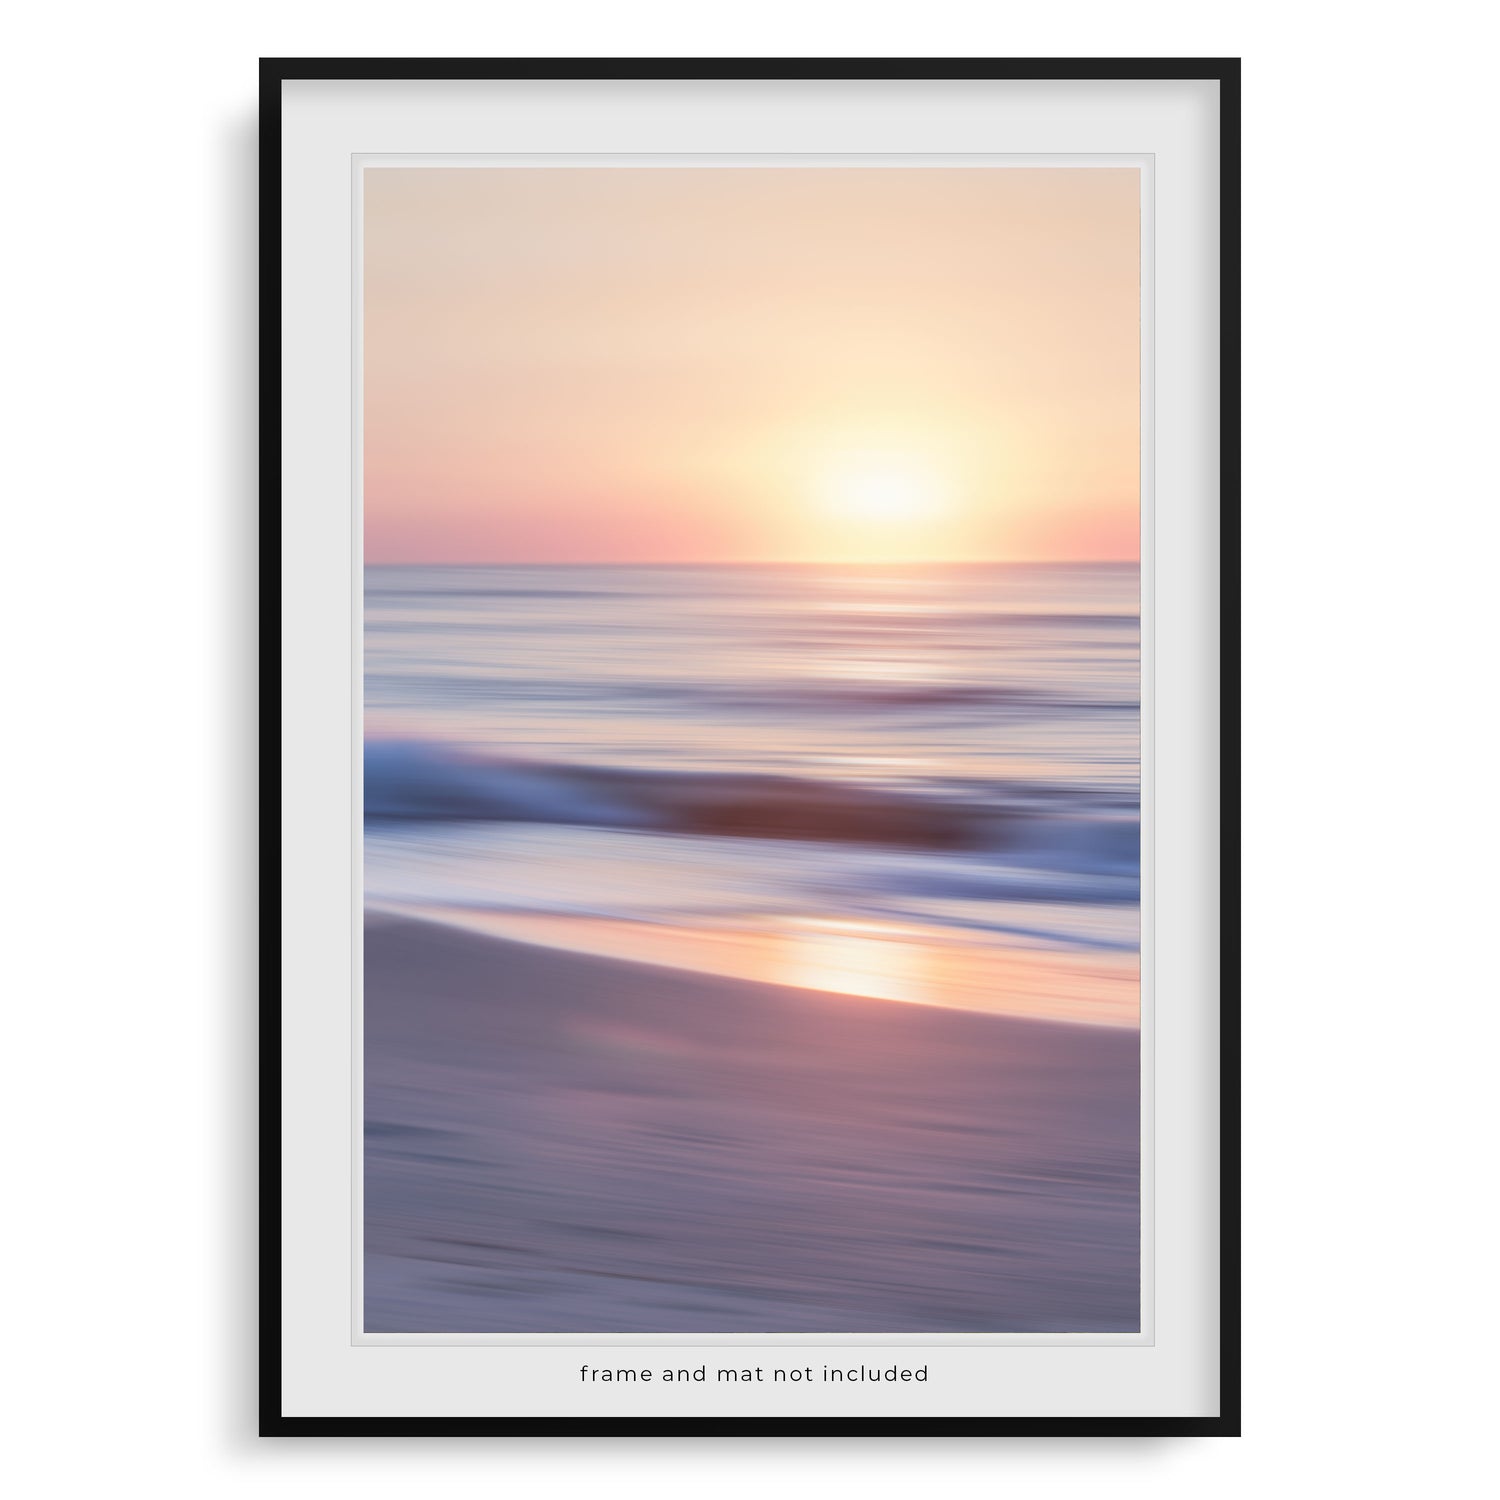 Ocean Sunrise wall art print - frame shown for display only, not included."